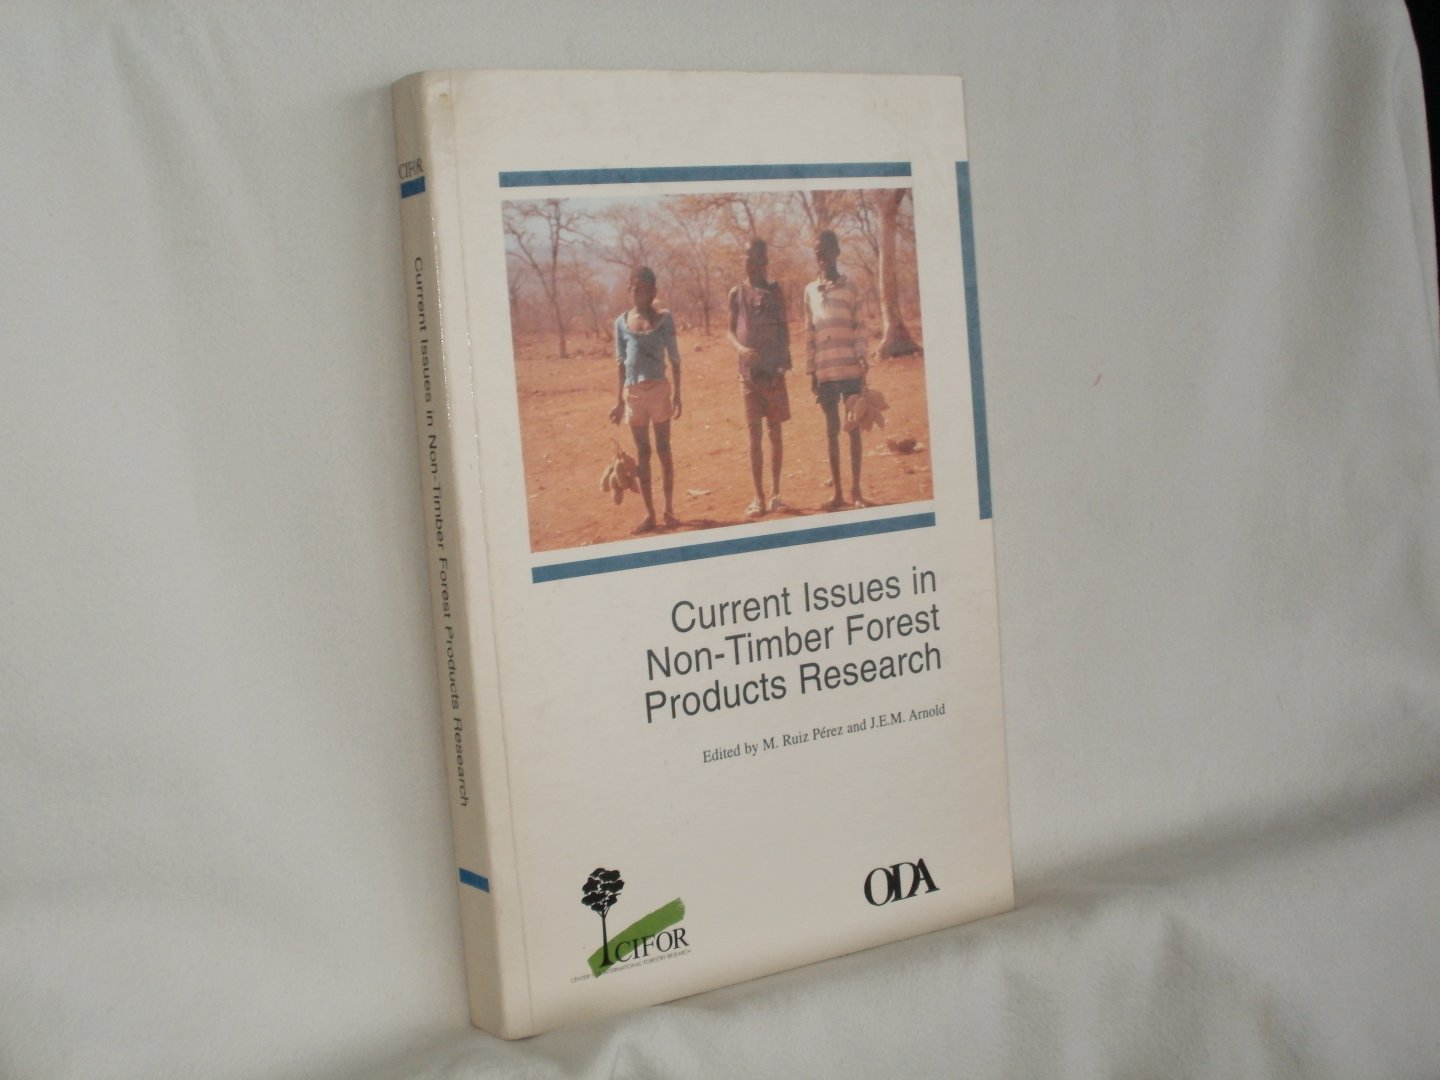 Perez, M. Ruiz; Arnold, J.E.M. (eds.) - Current Issues in Non-Timber Forest Products Research: Proceedings of the Workshop "Research on NTFP", Hot Springs, Zimbabwe, 28 August - 2 September 1995